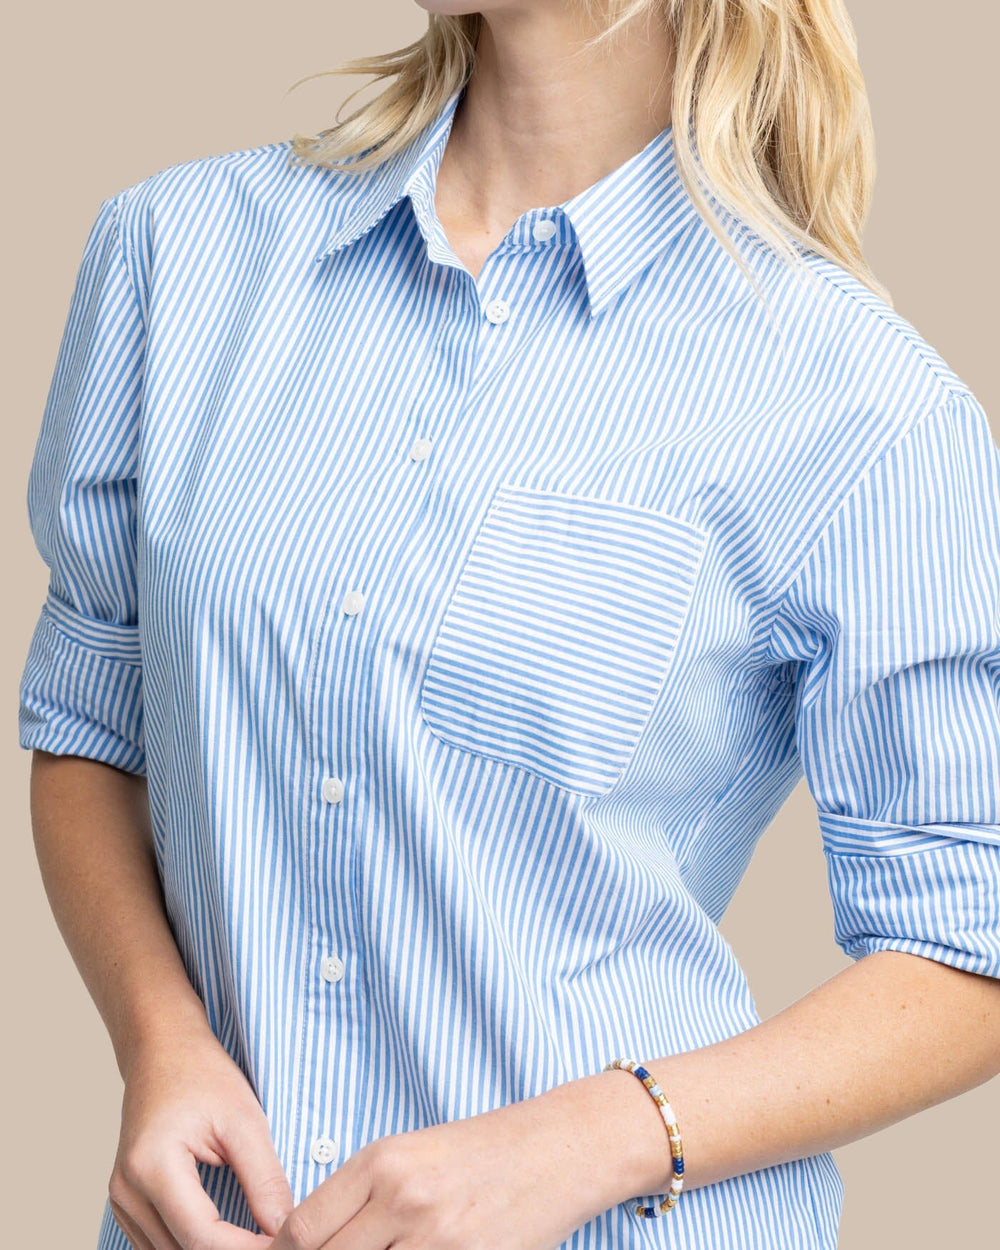 The detail view of the Southern Tide Cam Stripe Poplin Dress by Southern Tide - Blue Fin